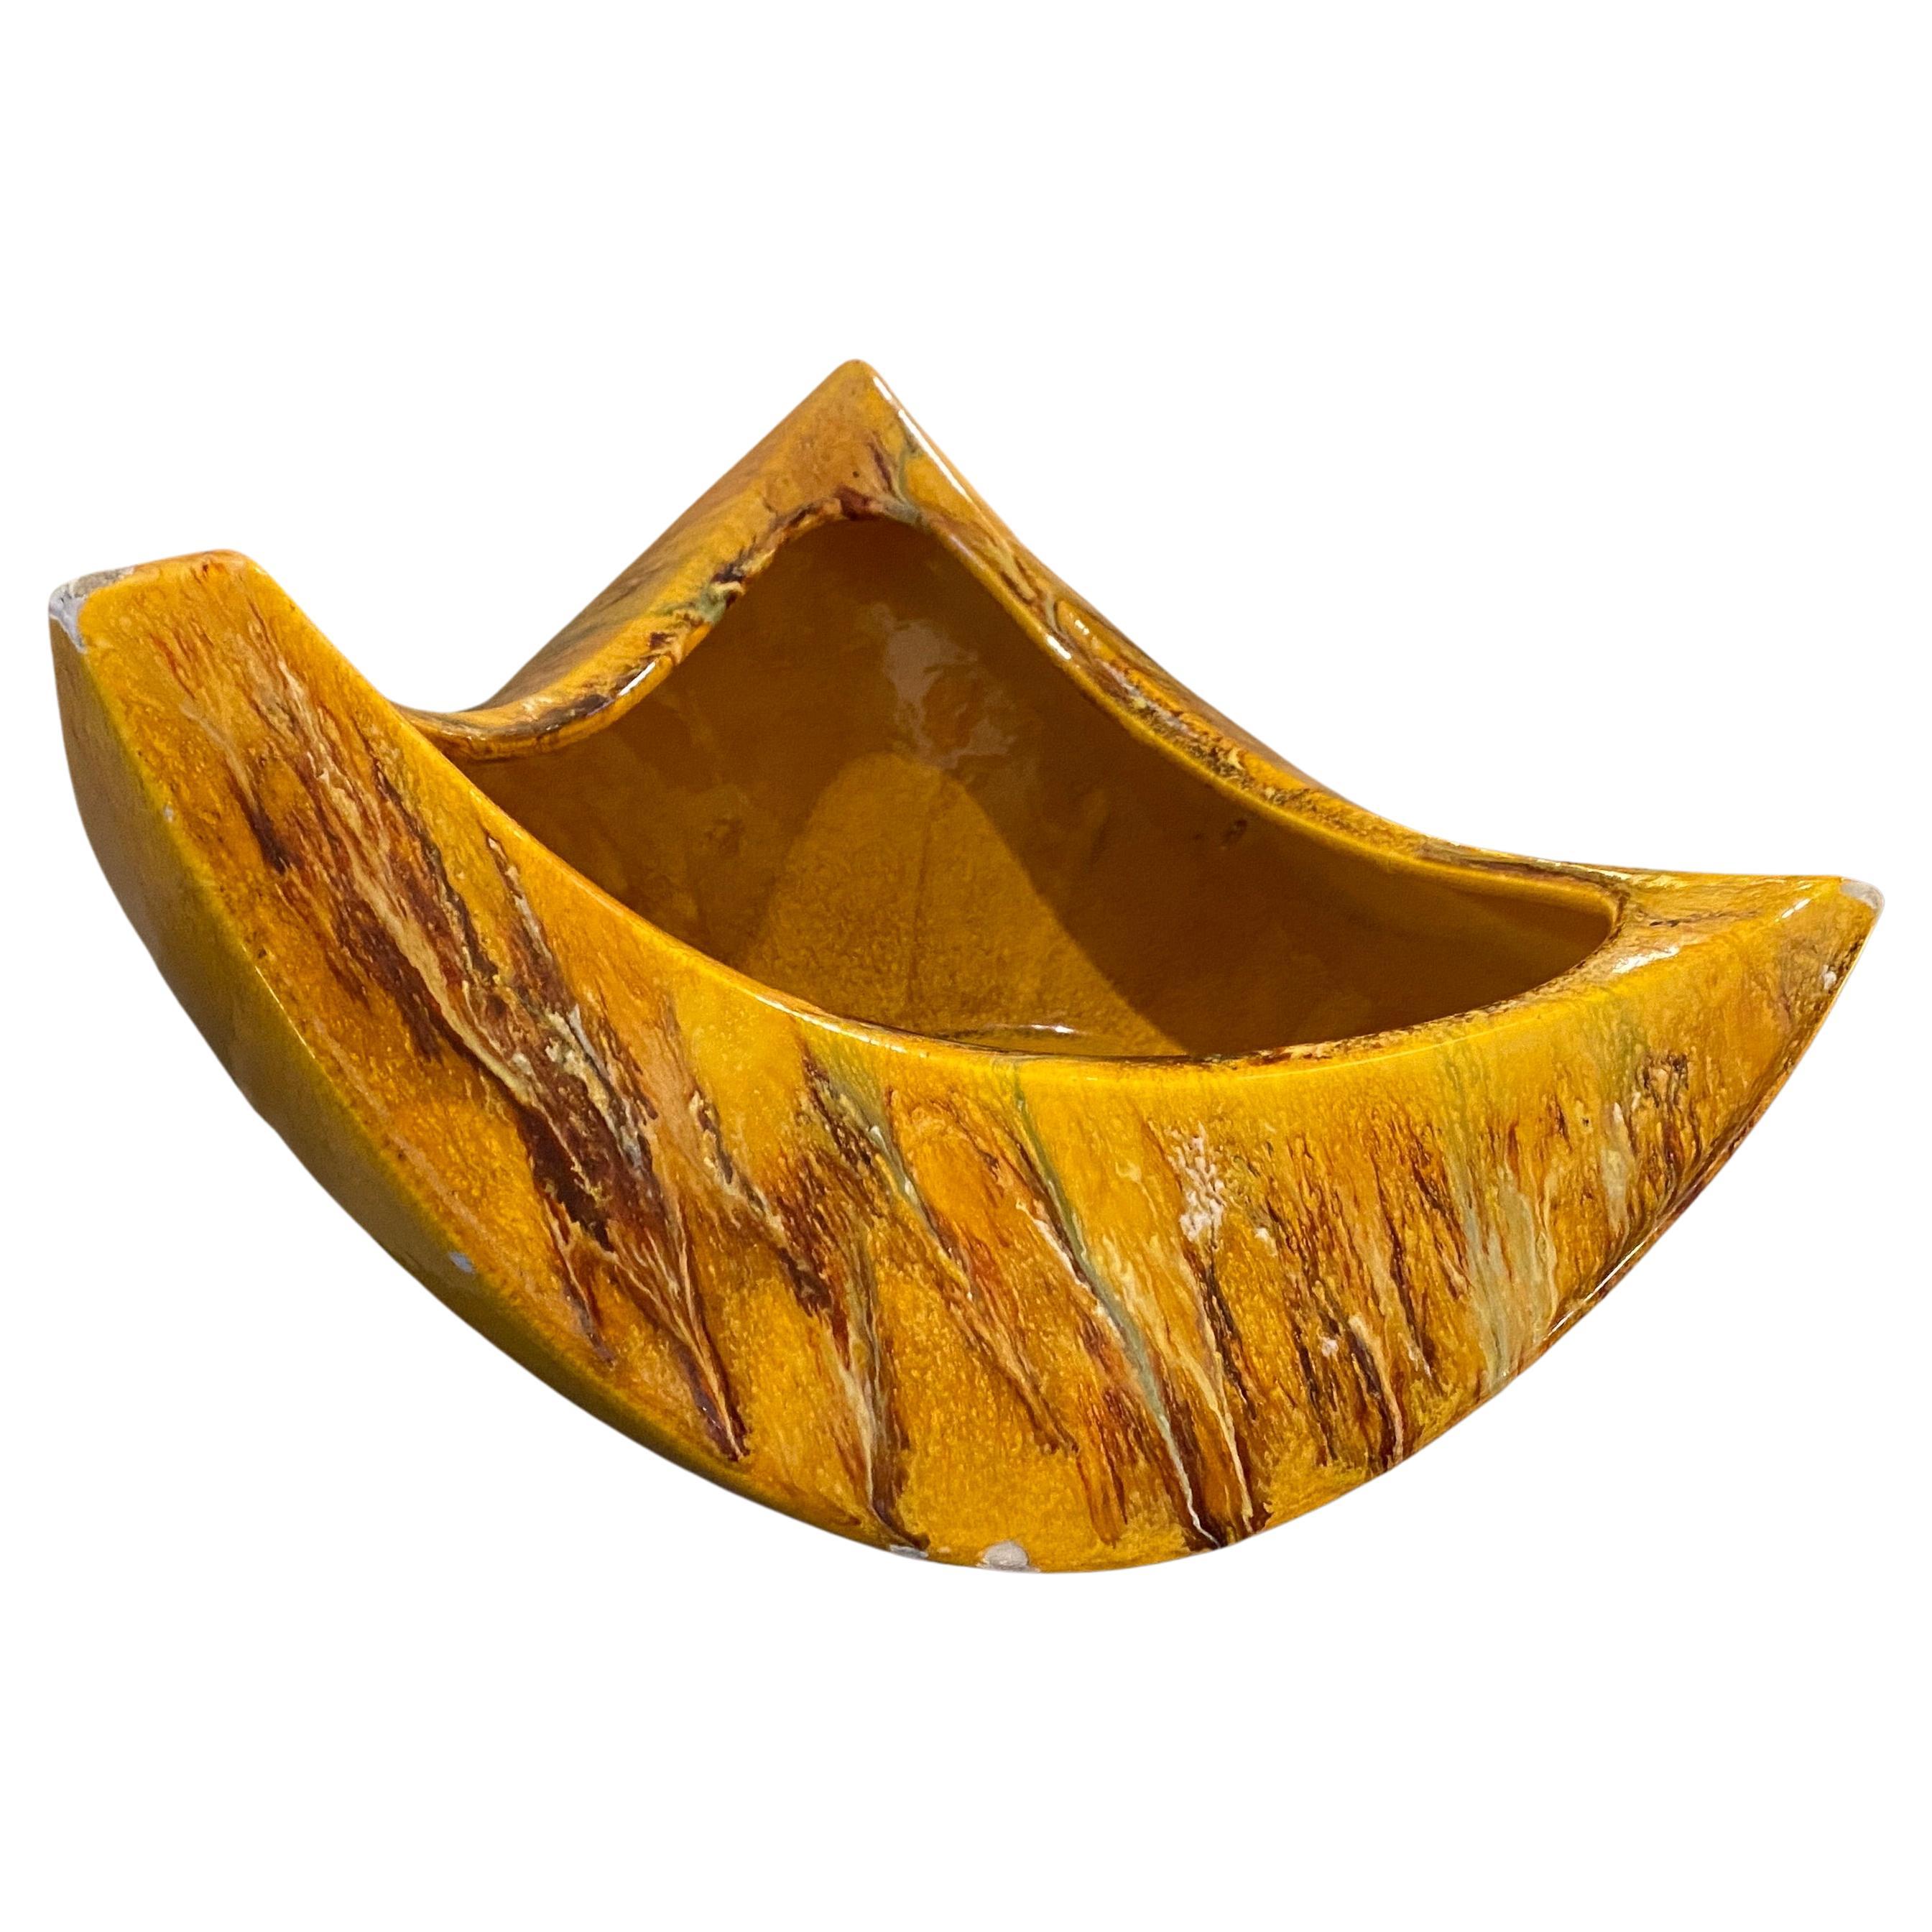 An amazing yellow ceramic centerpiece manufactured and hand-painted in Italy in the Seventies, designs by Bertoncello, italian famous manufacturer of the period. the centerpieces it has signs of use and age visible on the photos.